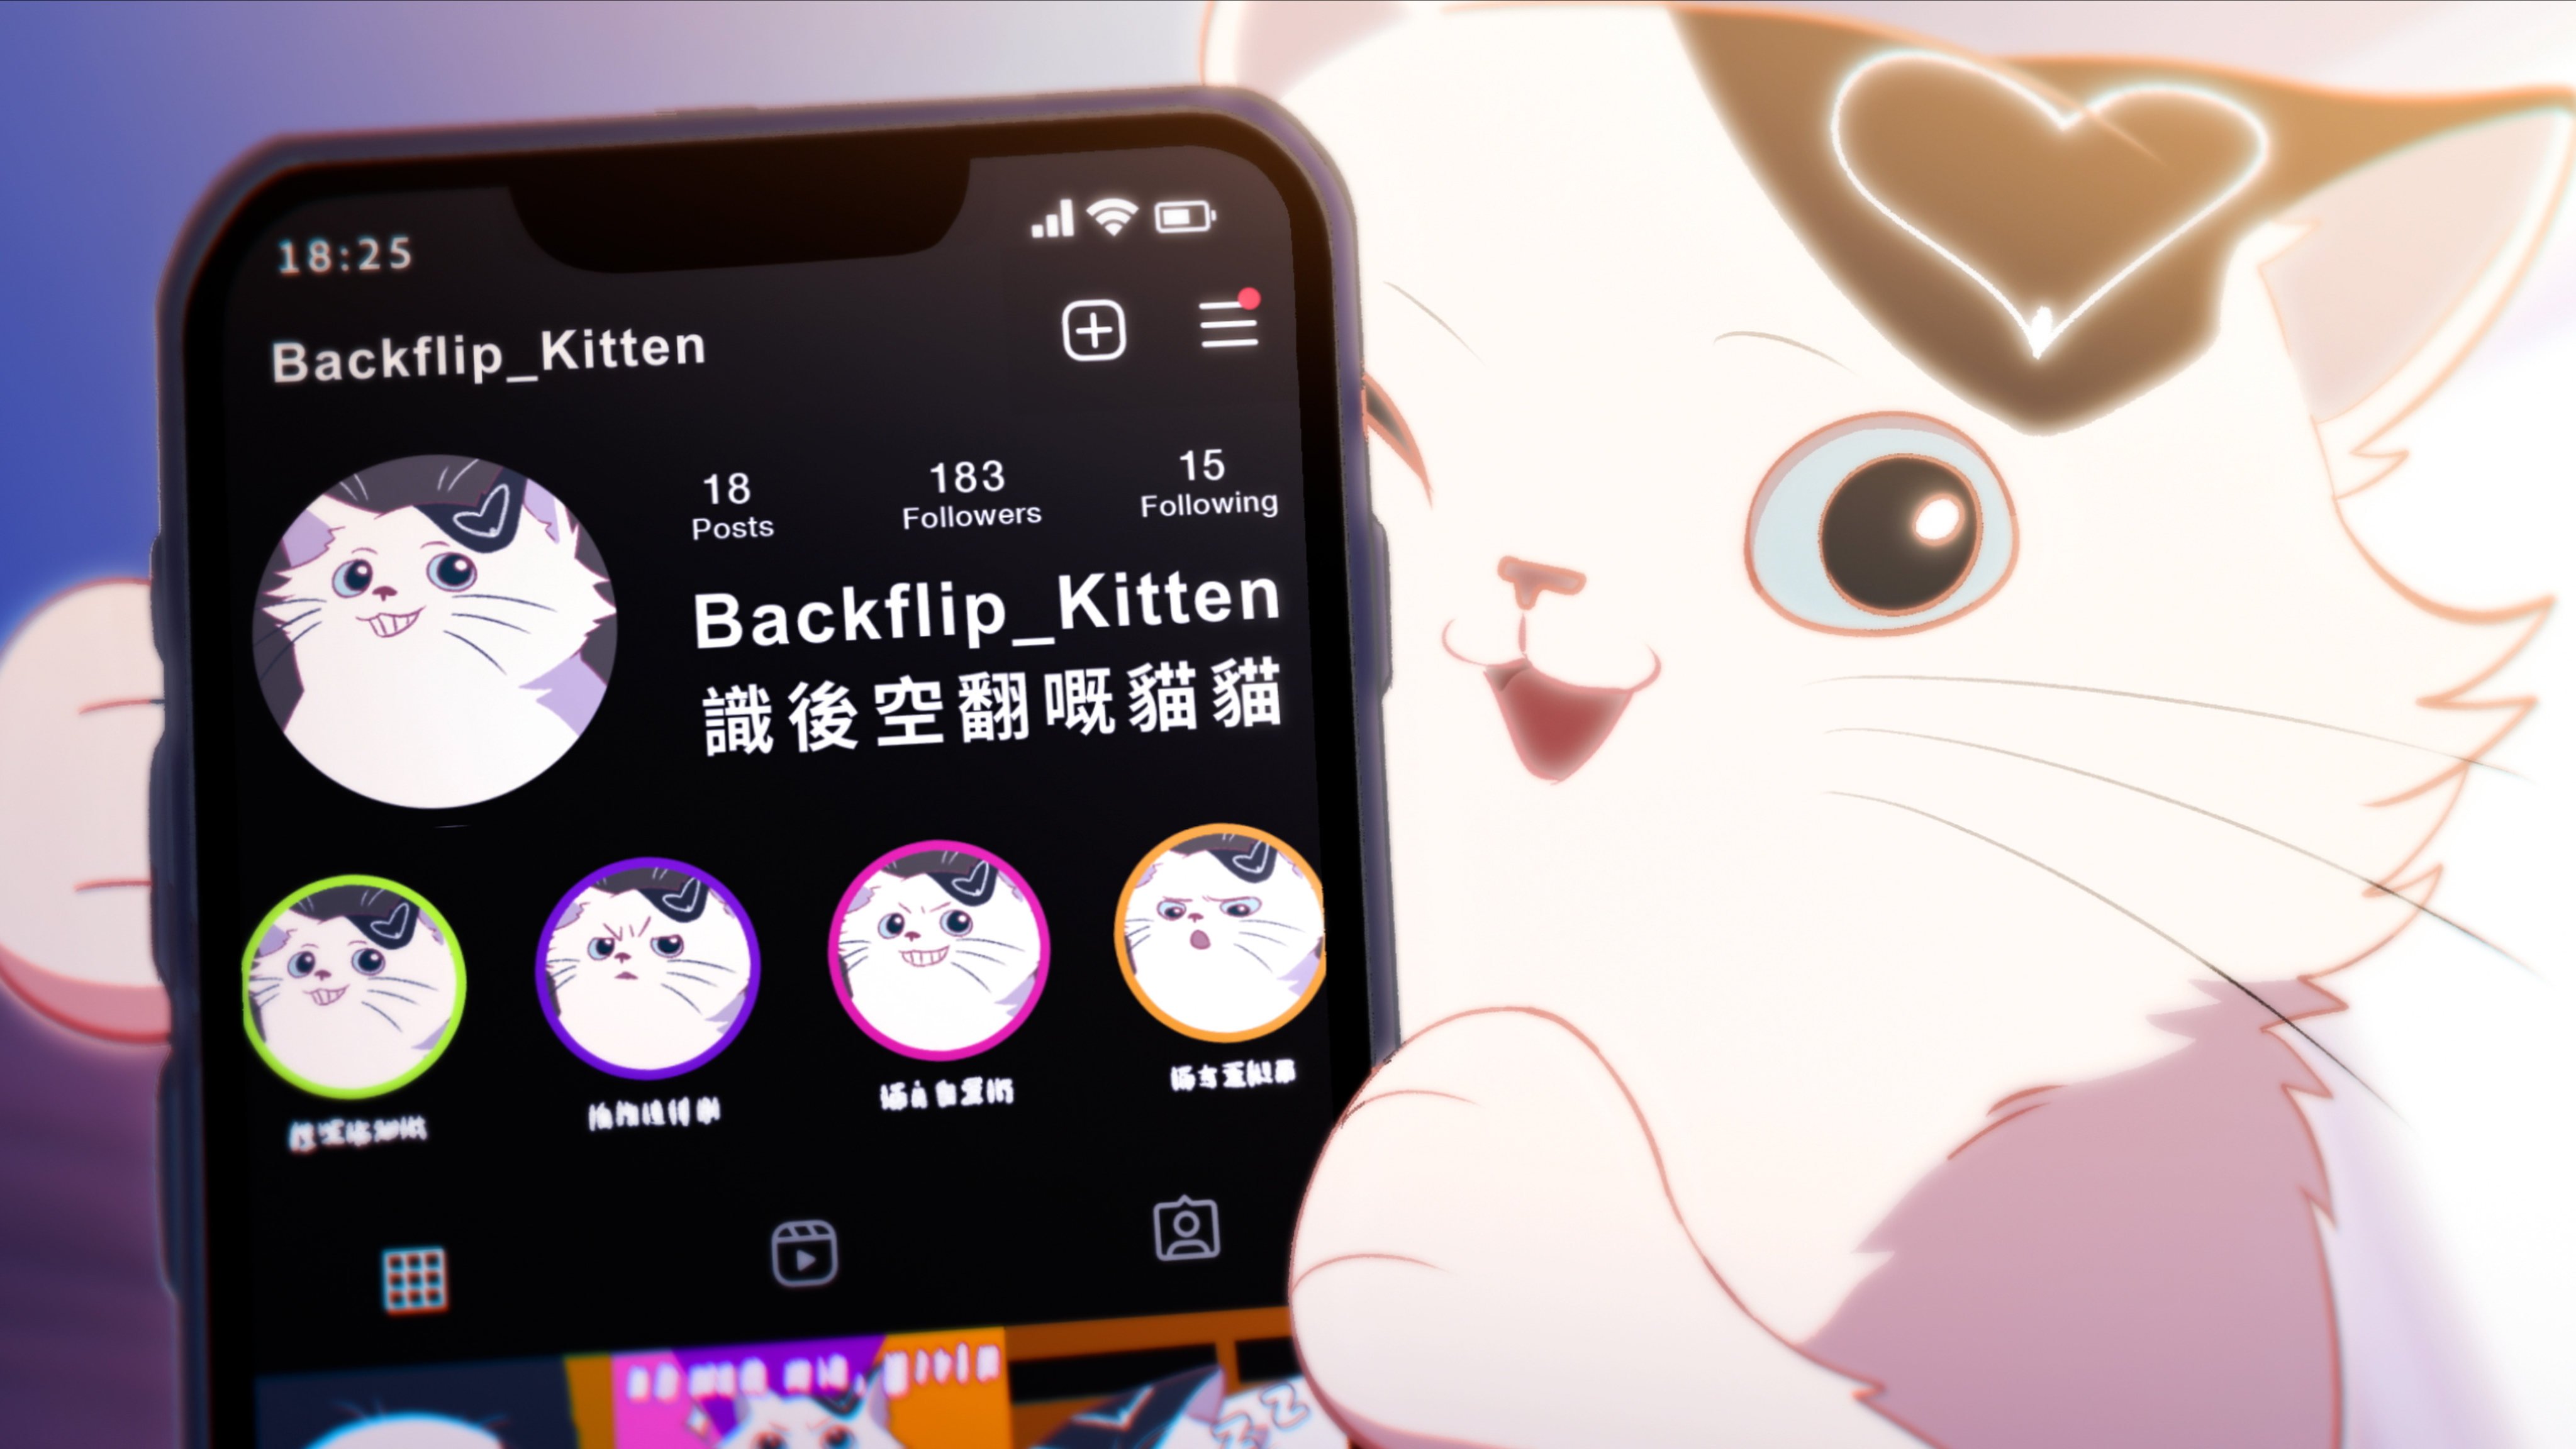 Backflip Kitten, the feline character featured in the new Mother’s Choice video, has its own Instagram account. Photo: courtesy of Mother’s Choice